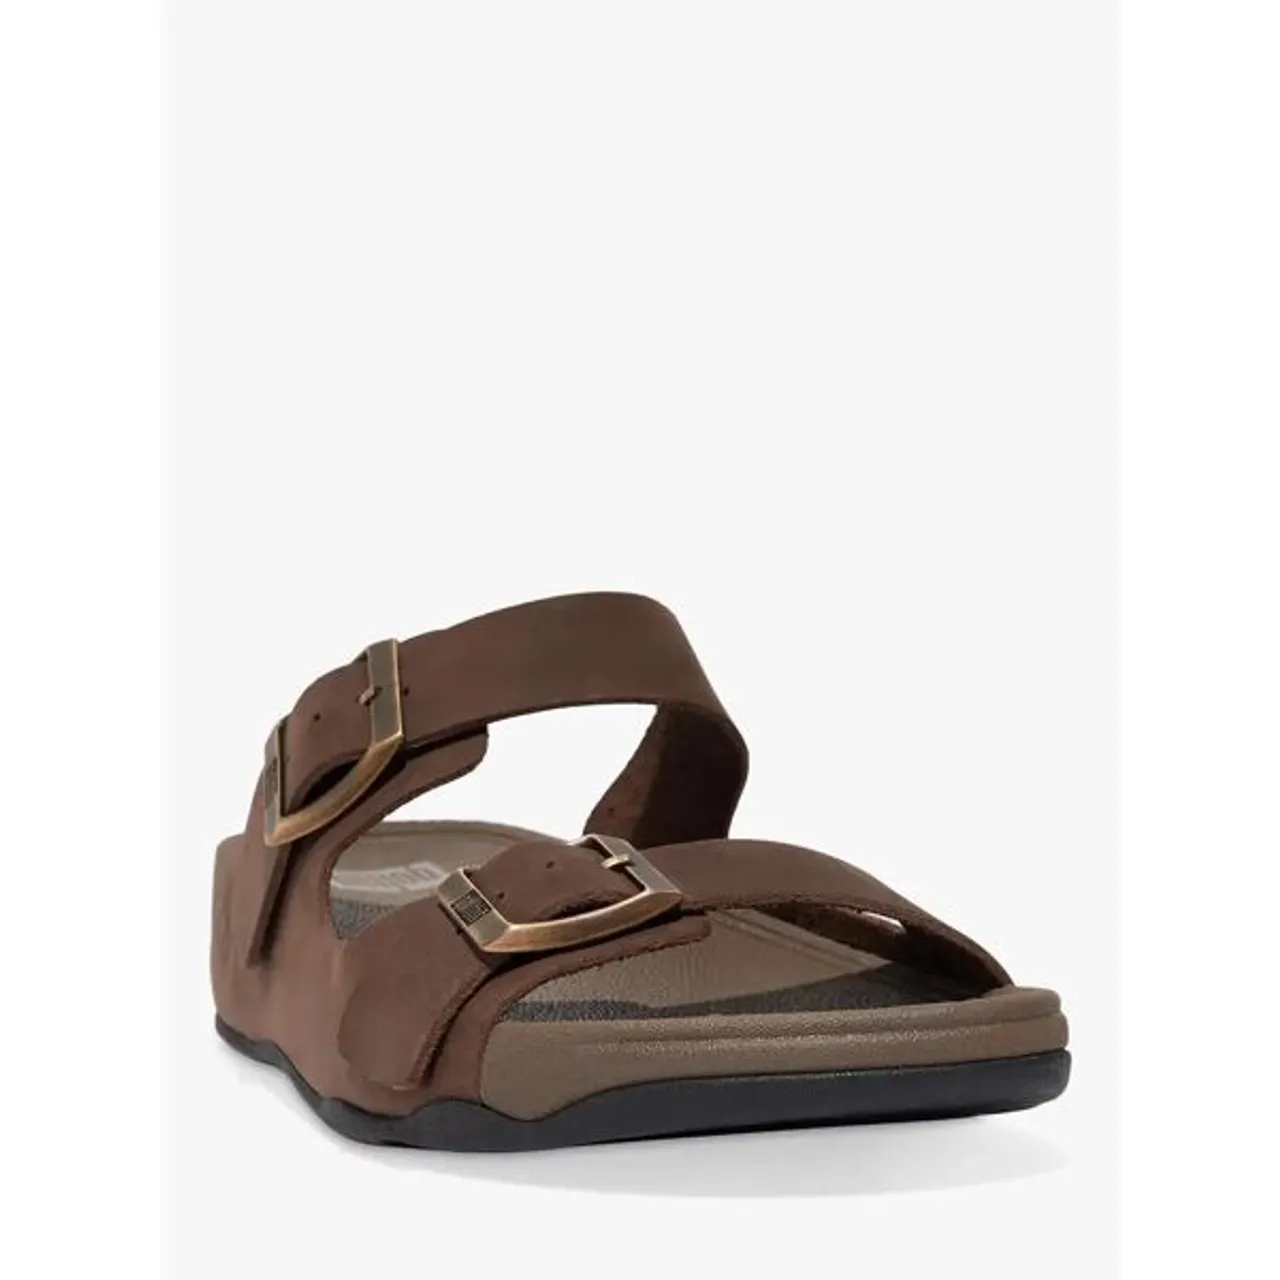 FitFlop Gogh Moc Leather Sliders - Chocolate - Male